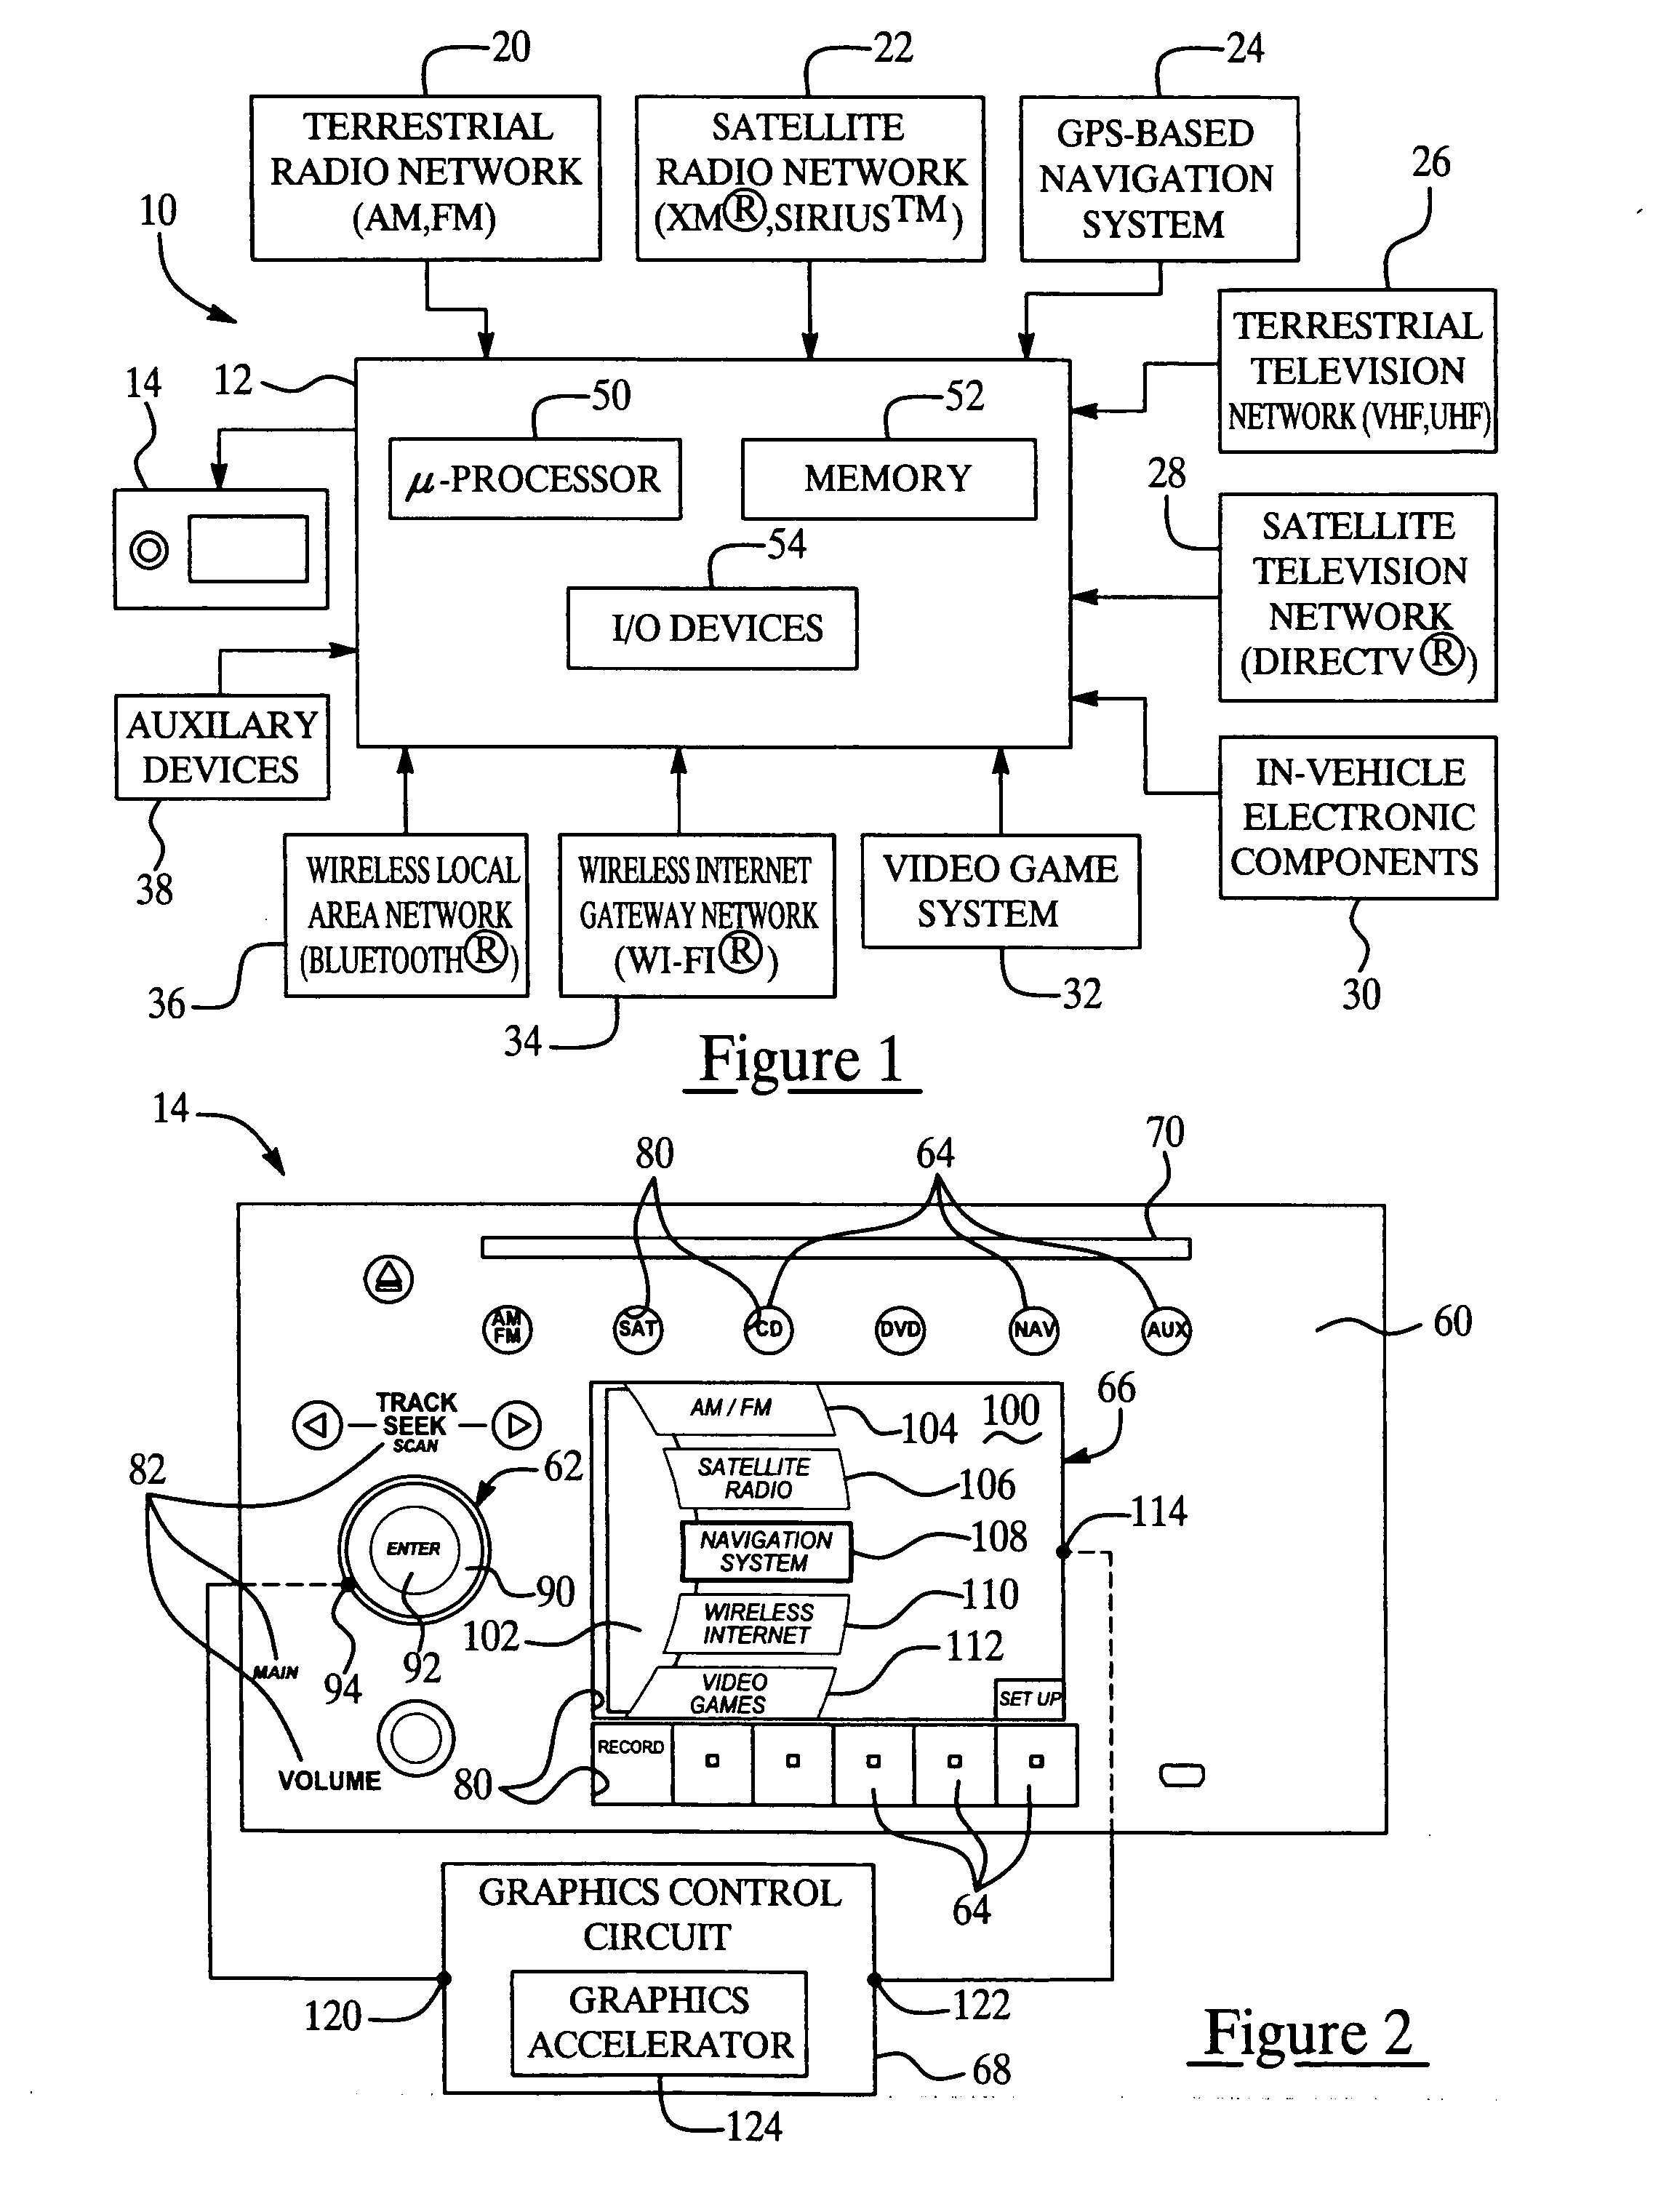 Graphical user interface for use with a multi-media system